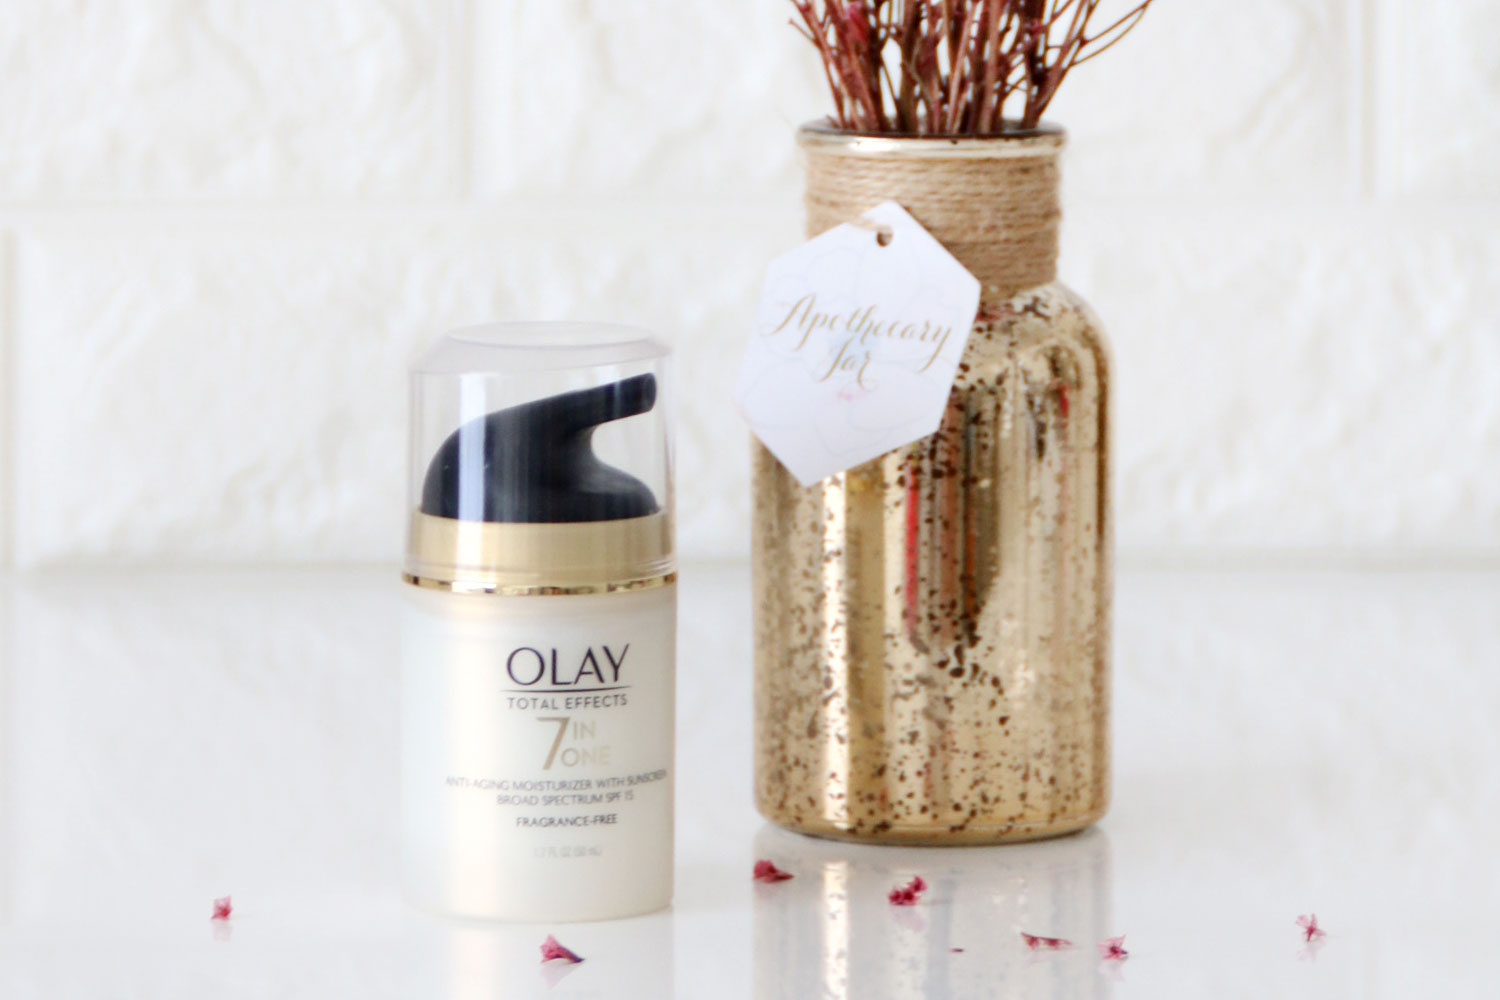 Olay Total Effects Anti-Aging Fragrance-Free Moisturizer